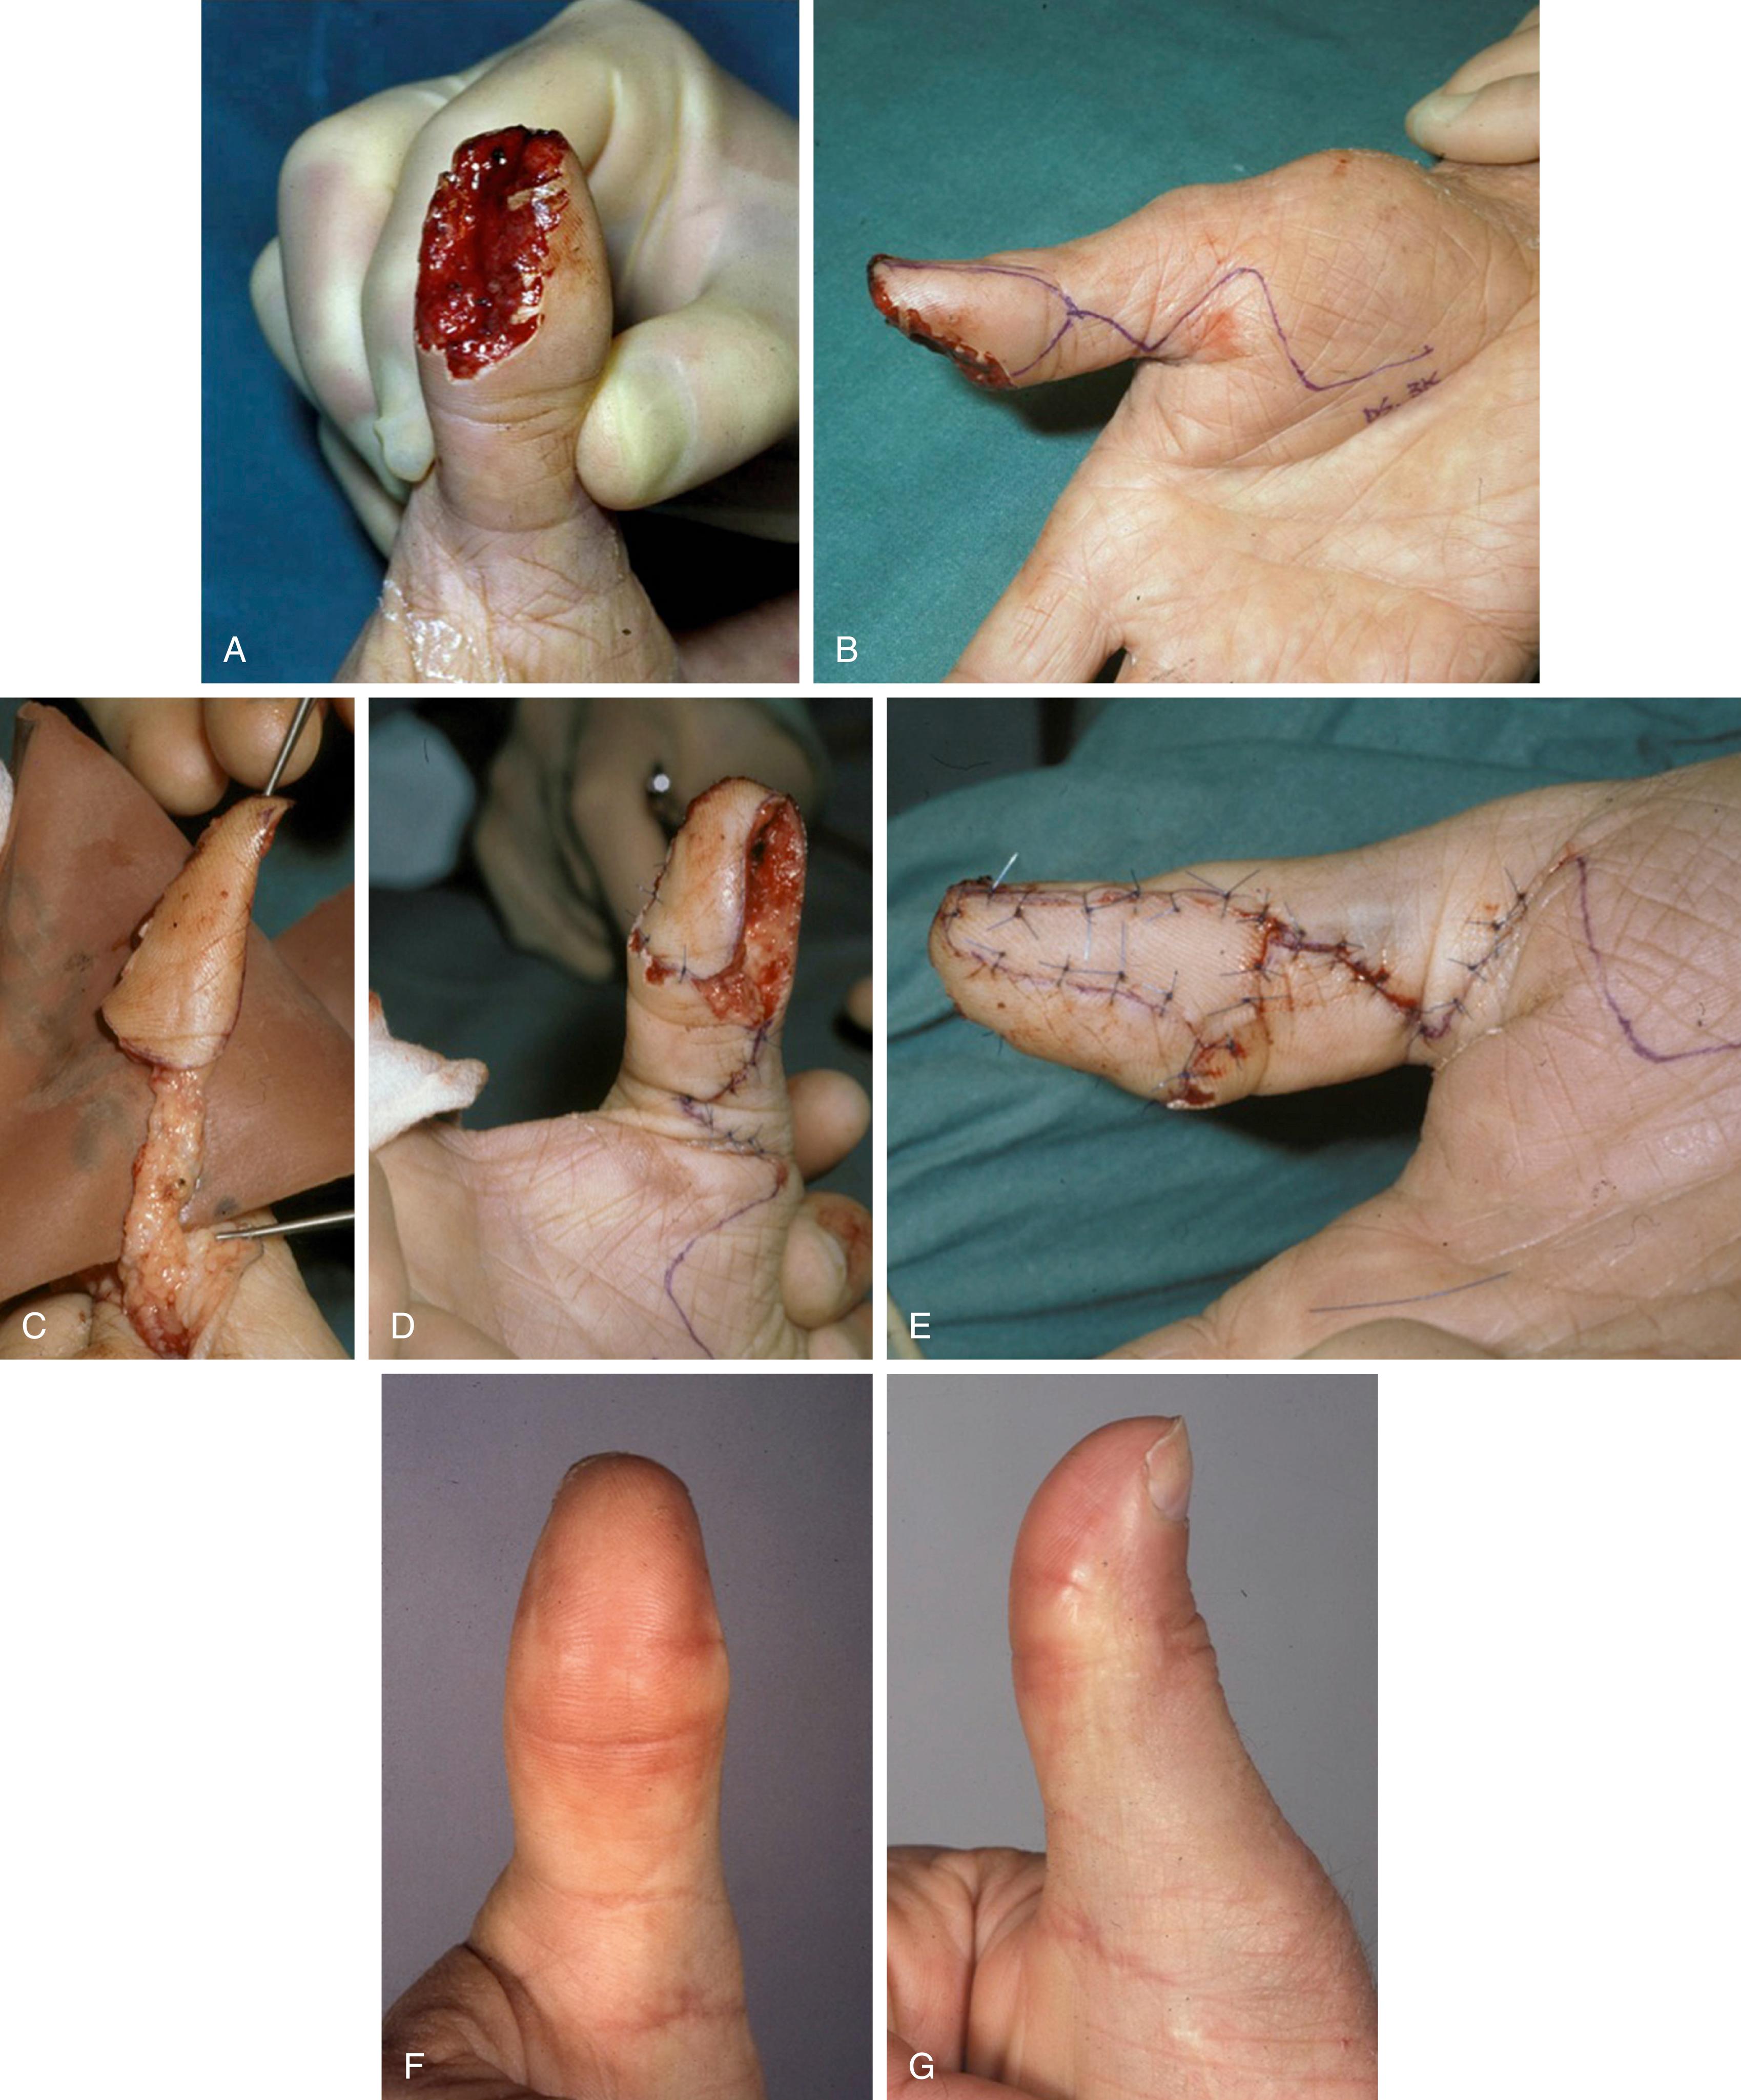 Fig. 46.2, Pulp exchange flap. (A) The defect involves the entire leading (ulnar)surface of the thumb pulp. (B) The trailing (radial) aspect of pulp is intact and an island flap is deigned on this pulp. (C) The flap is entirely islanded, leaving ample fat around the nerve and artery. (D) The island is transposed to reconstruct the ulnar pulp. (E) The secondary defect is resurfaced with a skin graft, in this case a full-thickness graft taken from the amputated part, which was de-fatted. (F,G) Final result at 3 months.